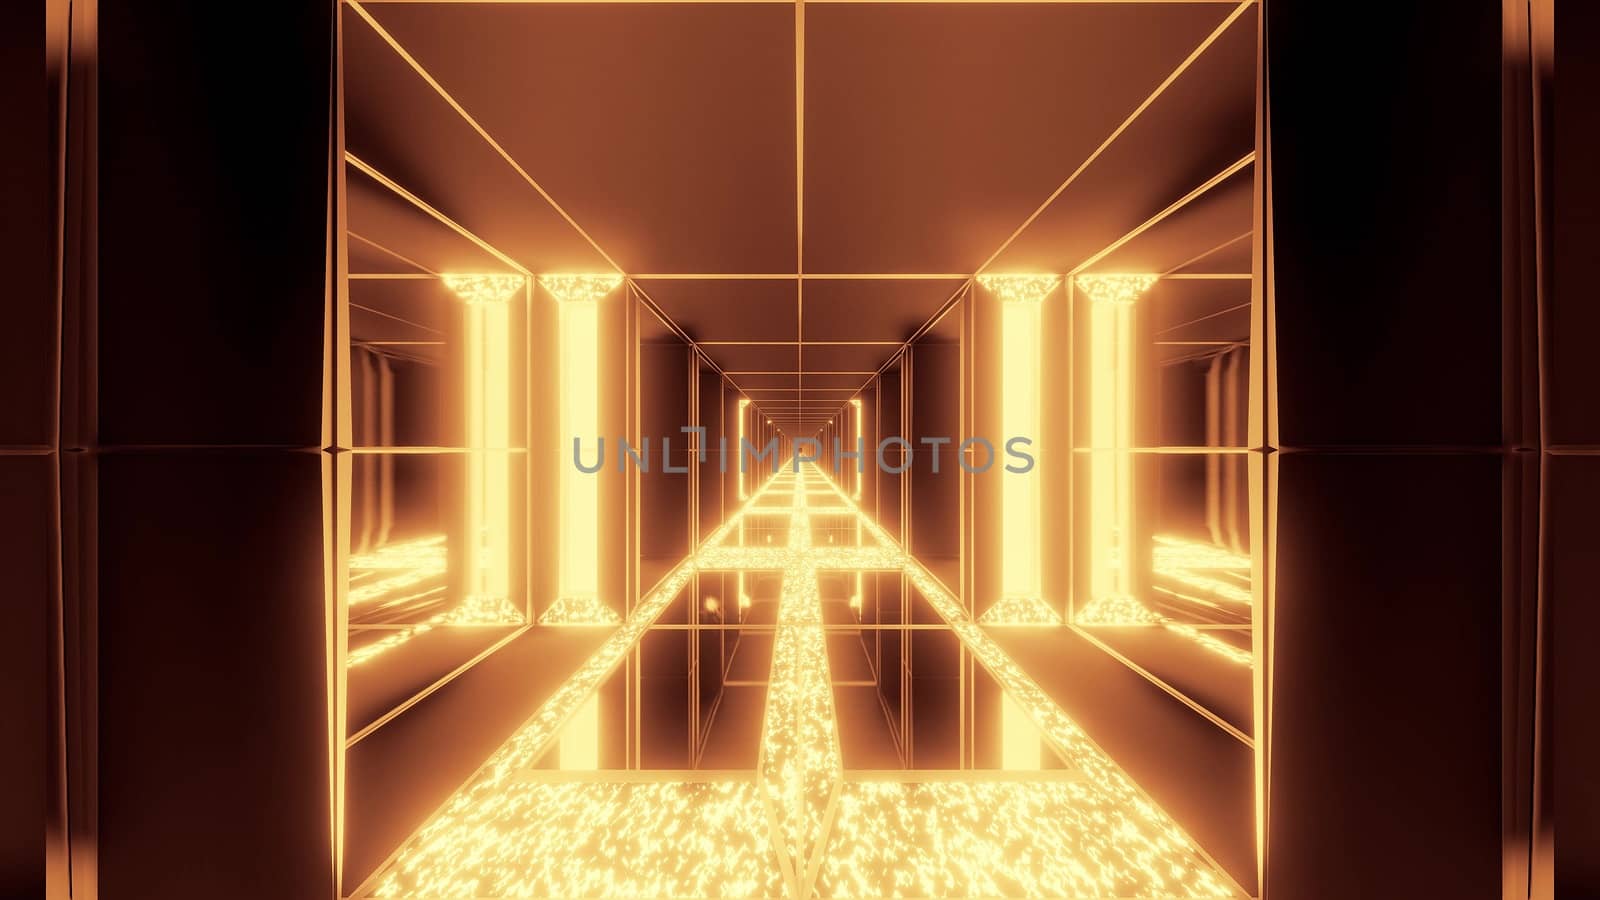 futuristic sci-fi space temple with glowing diamonds christmas texture 3d illustration background wallpaper by tunnelmotions